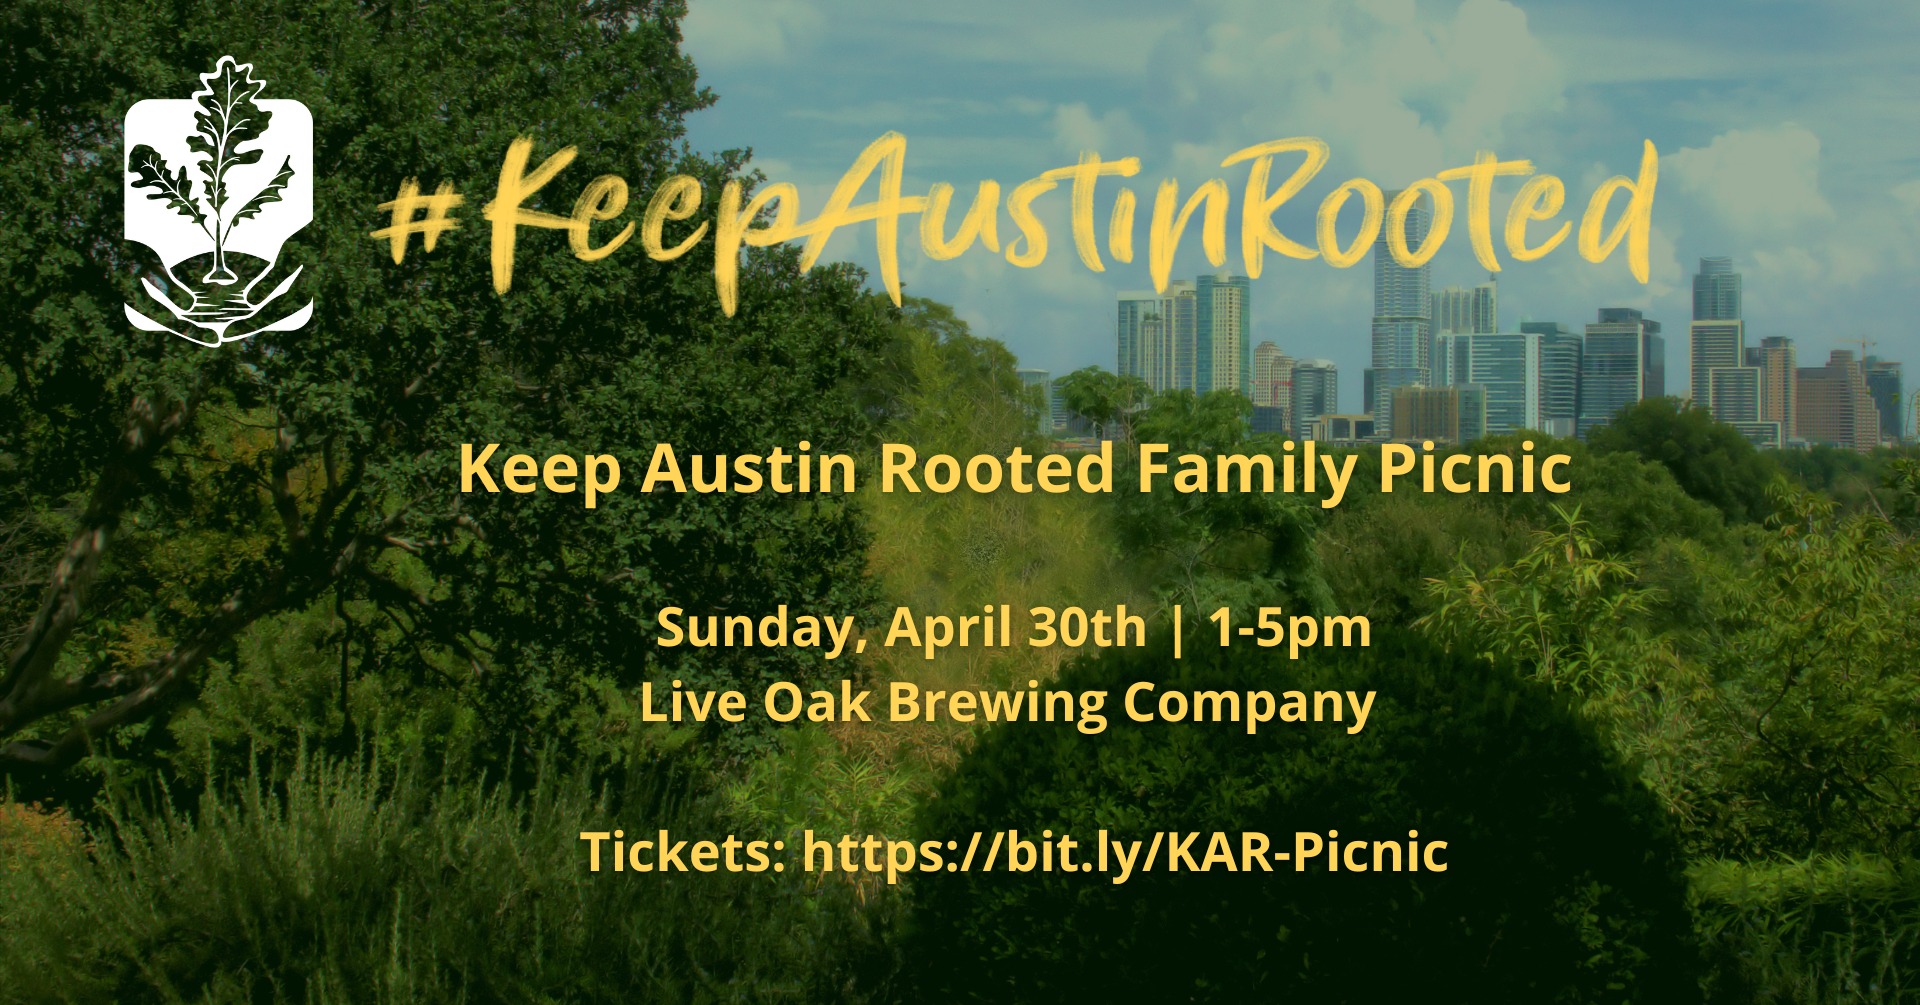 Keep Austin Rooted Family Picnic